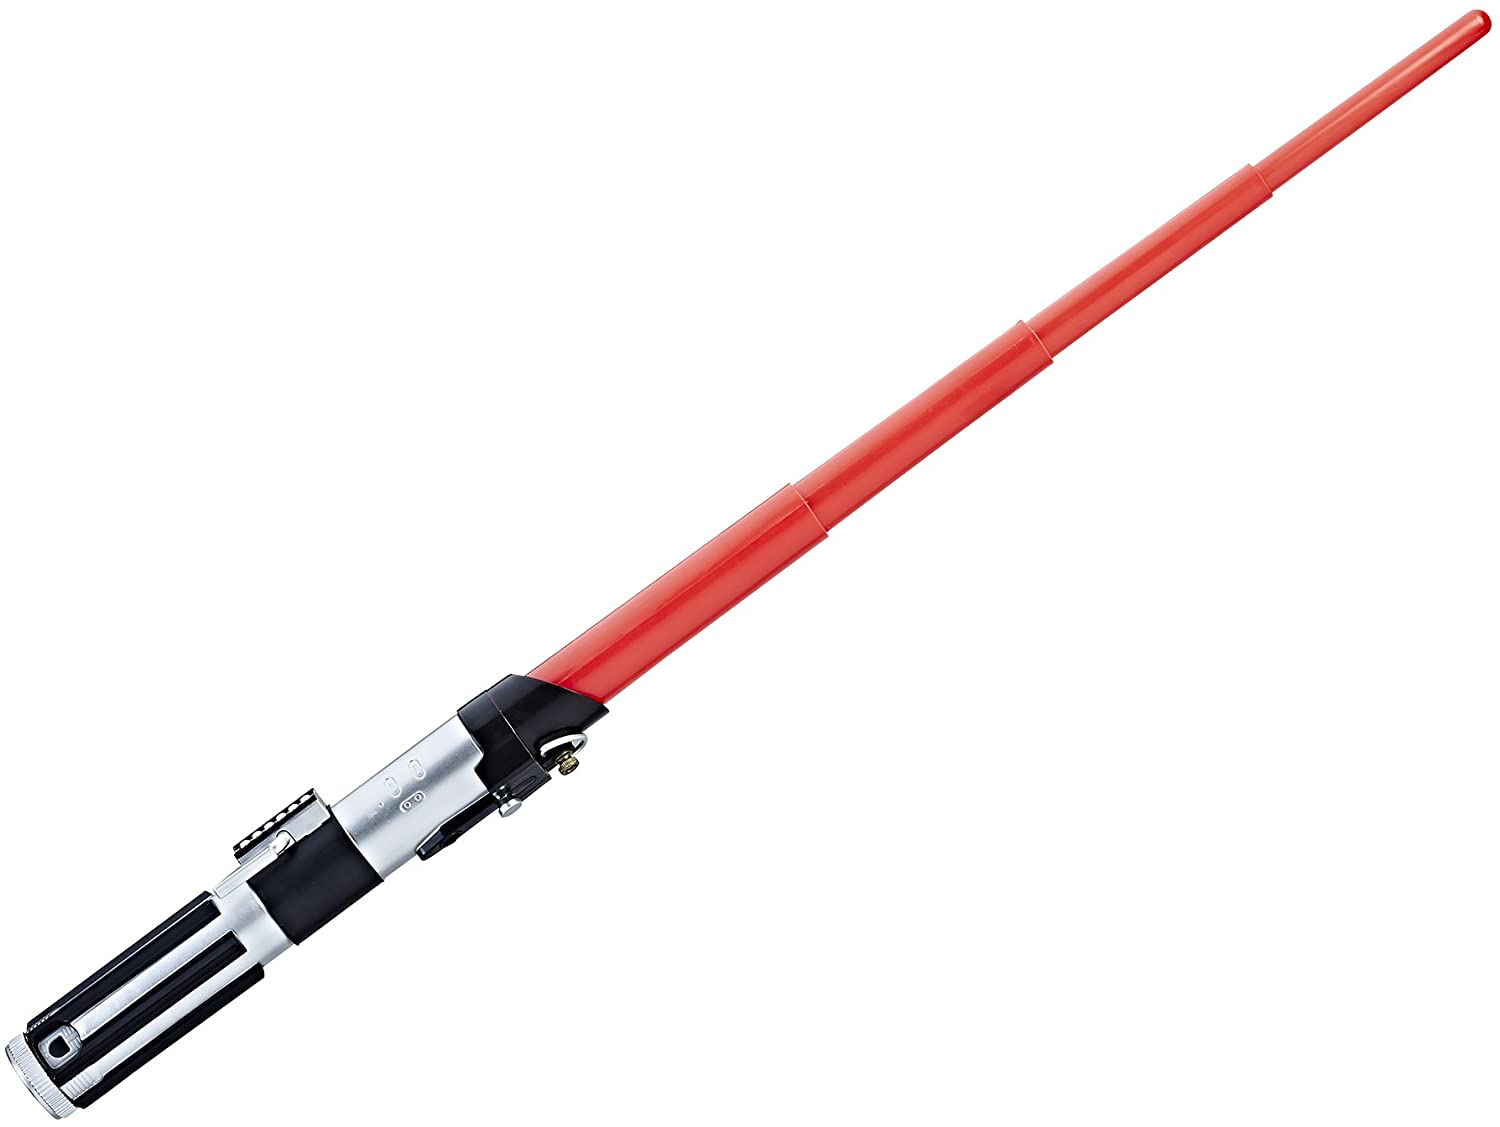 SWGOA Darth Vader Extendable Lightsaber Toy 2